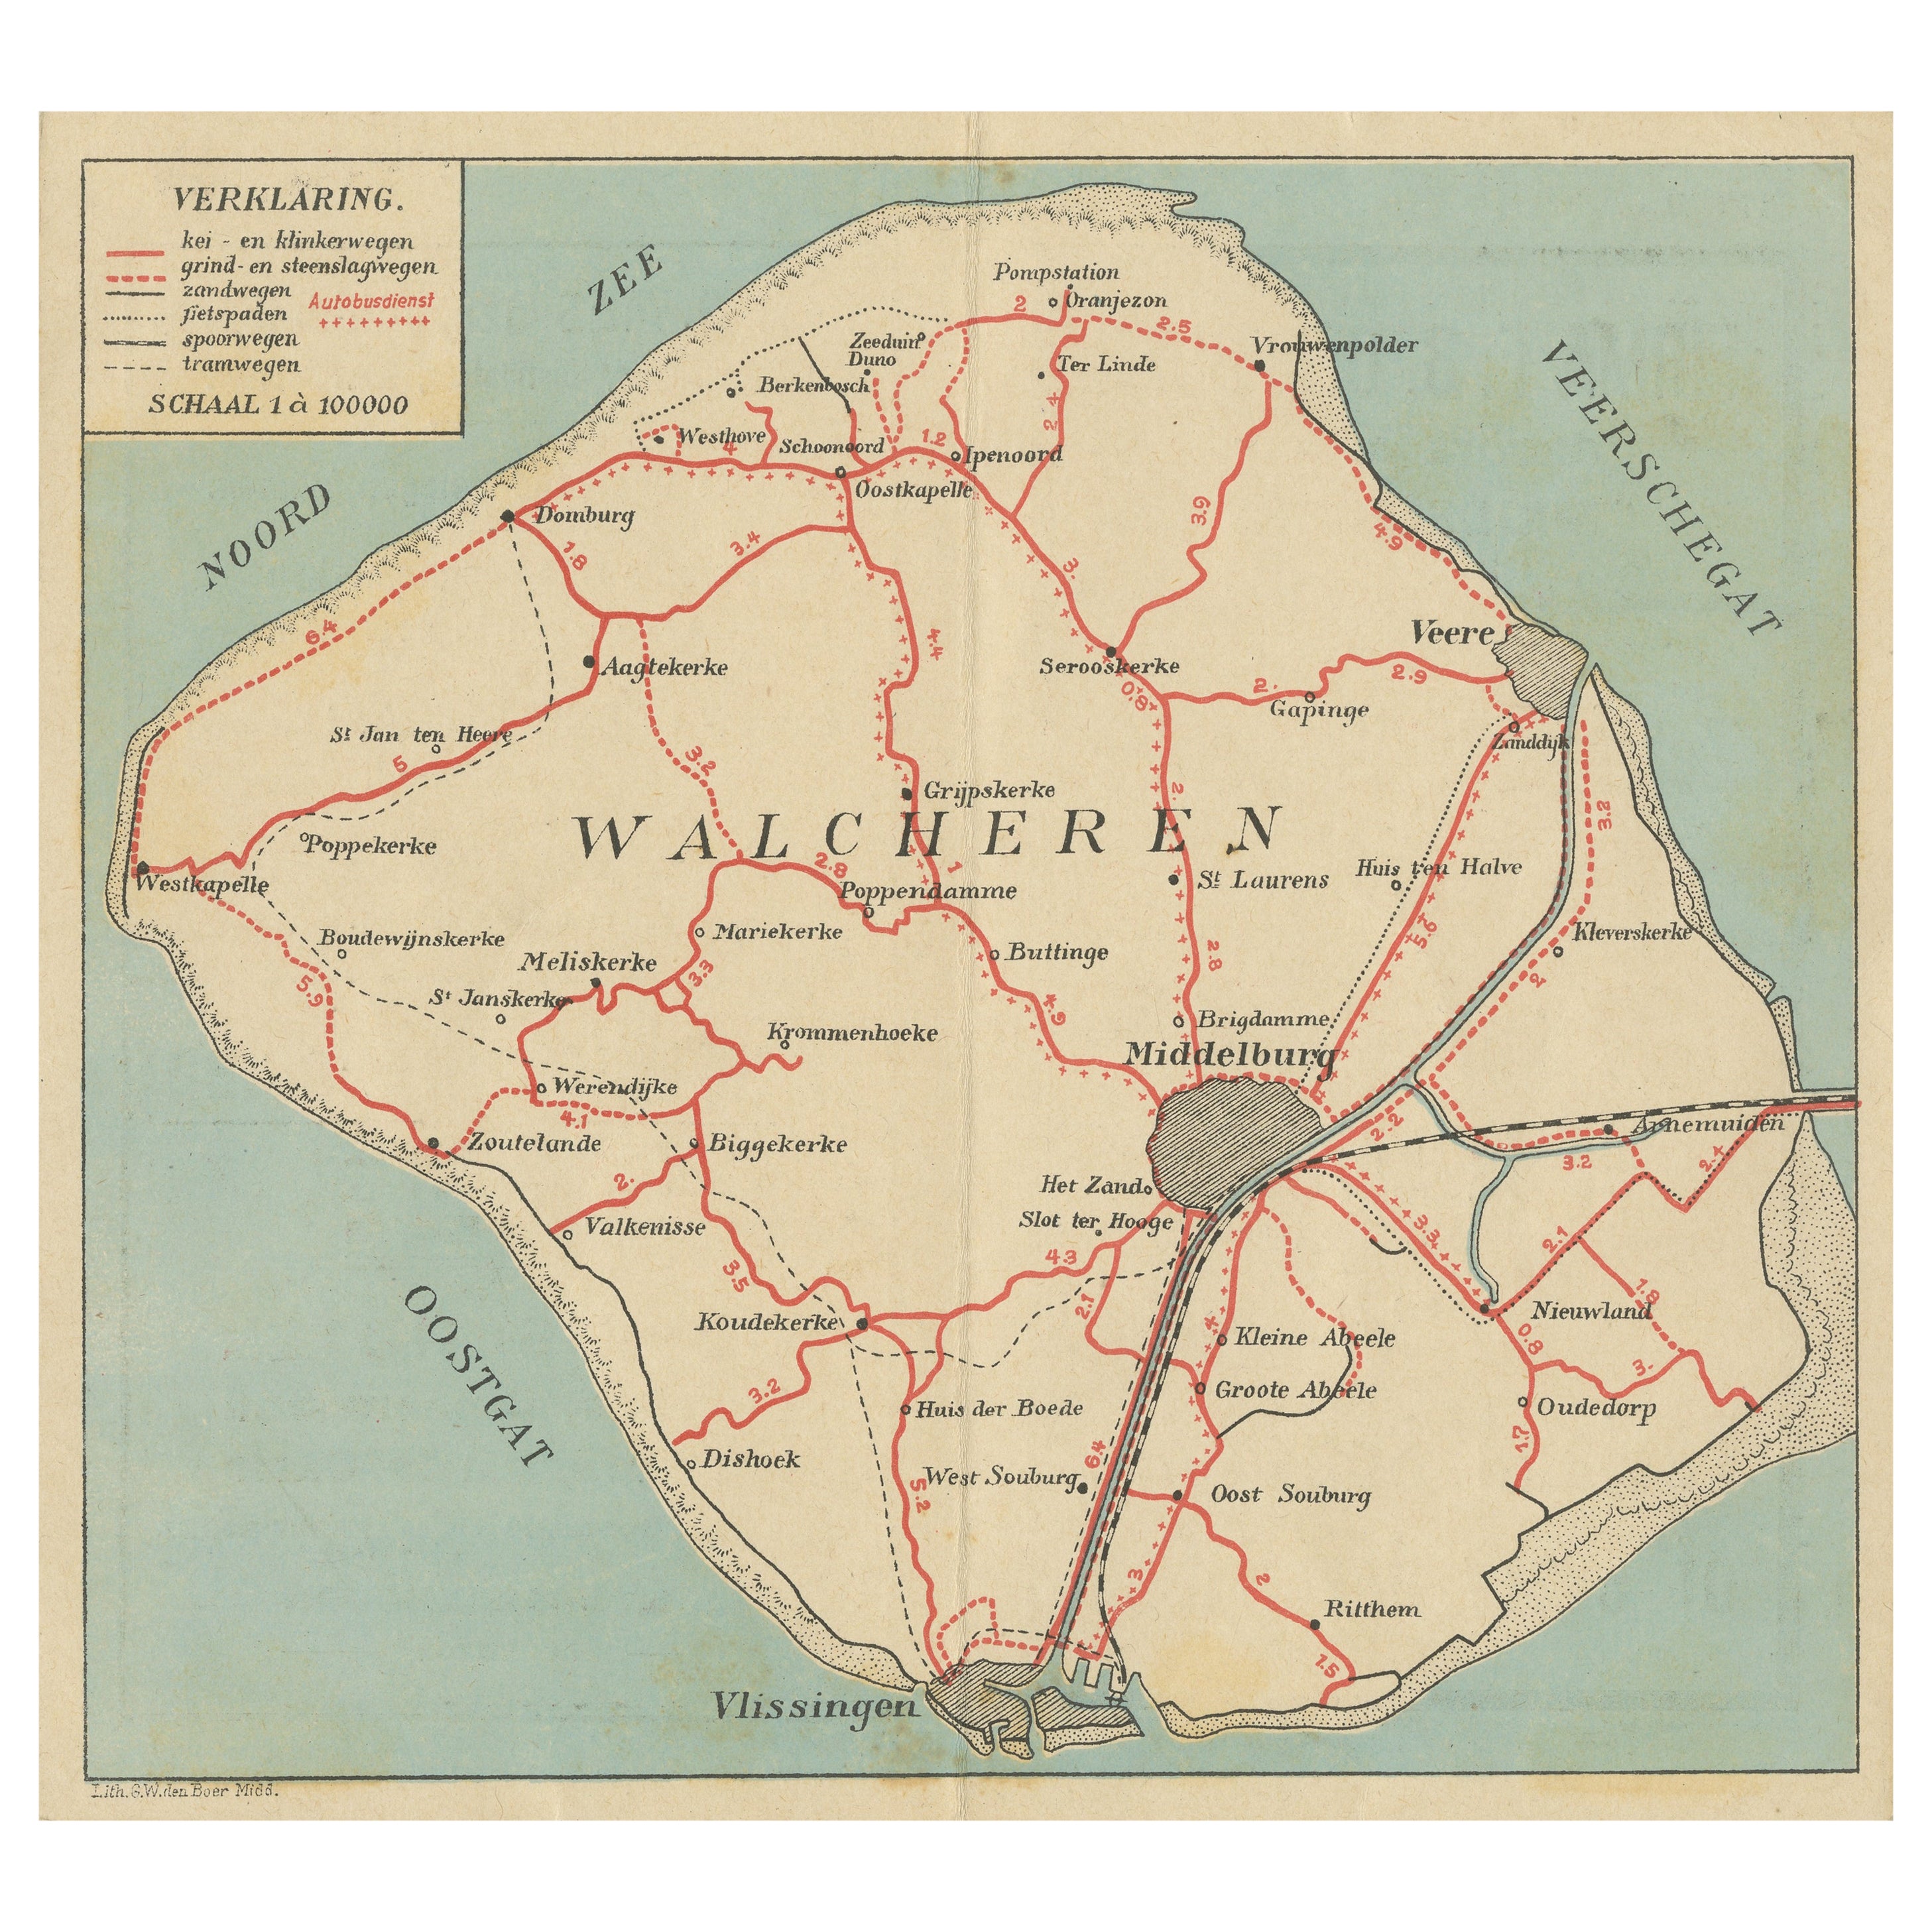 Antique Map of Walcheren in the Province of Zeeland, the Netherlands, ca.1910